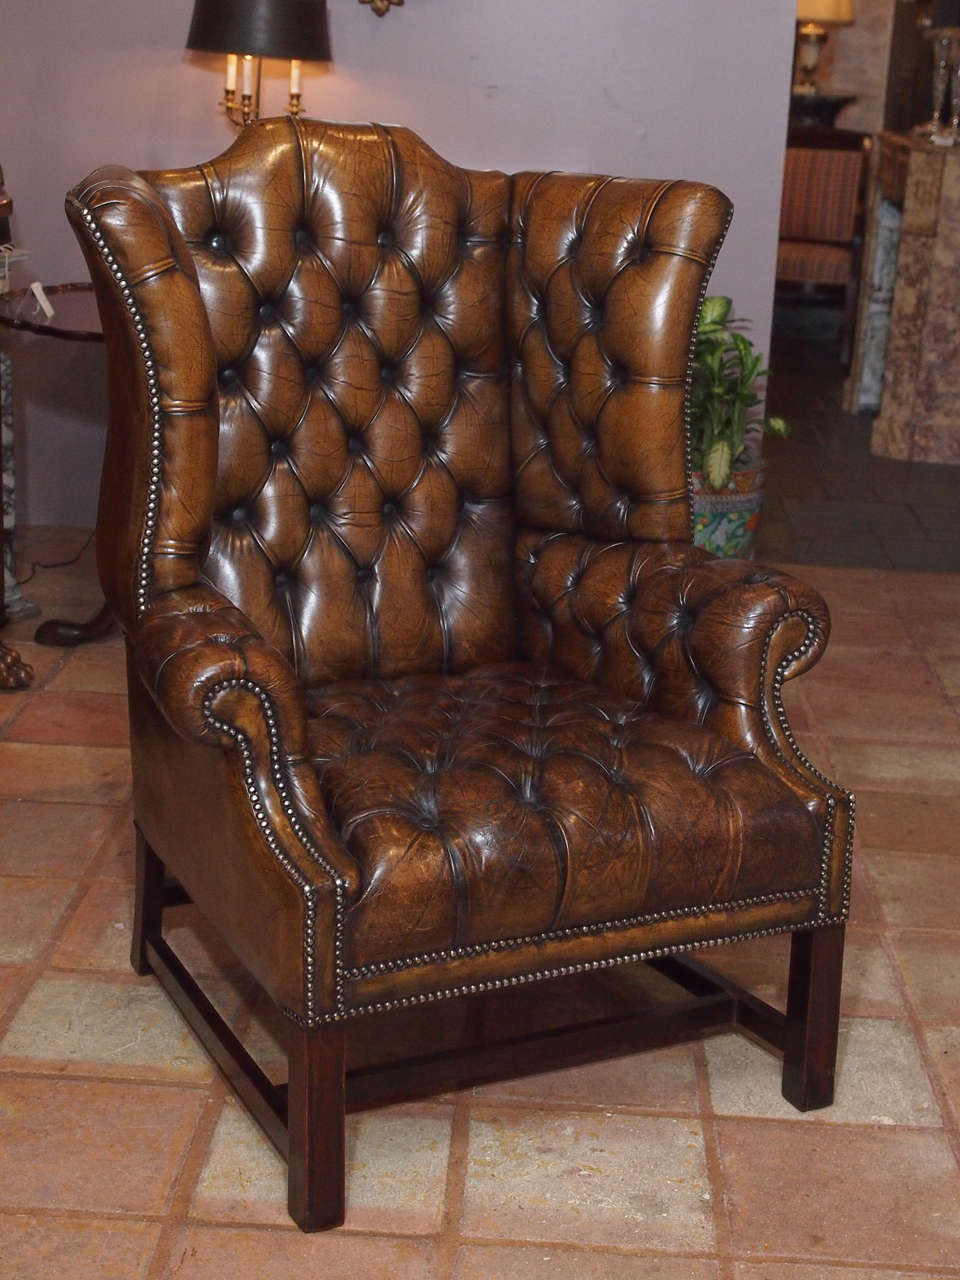 Antique English brown leather wing chair.  Circa 1870.